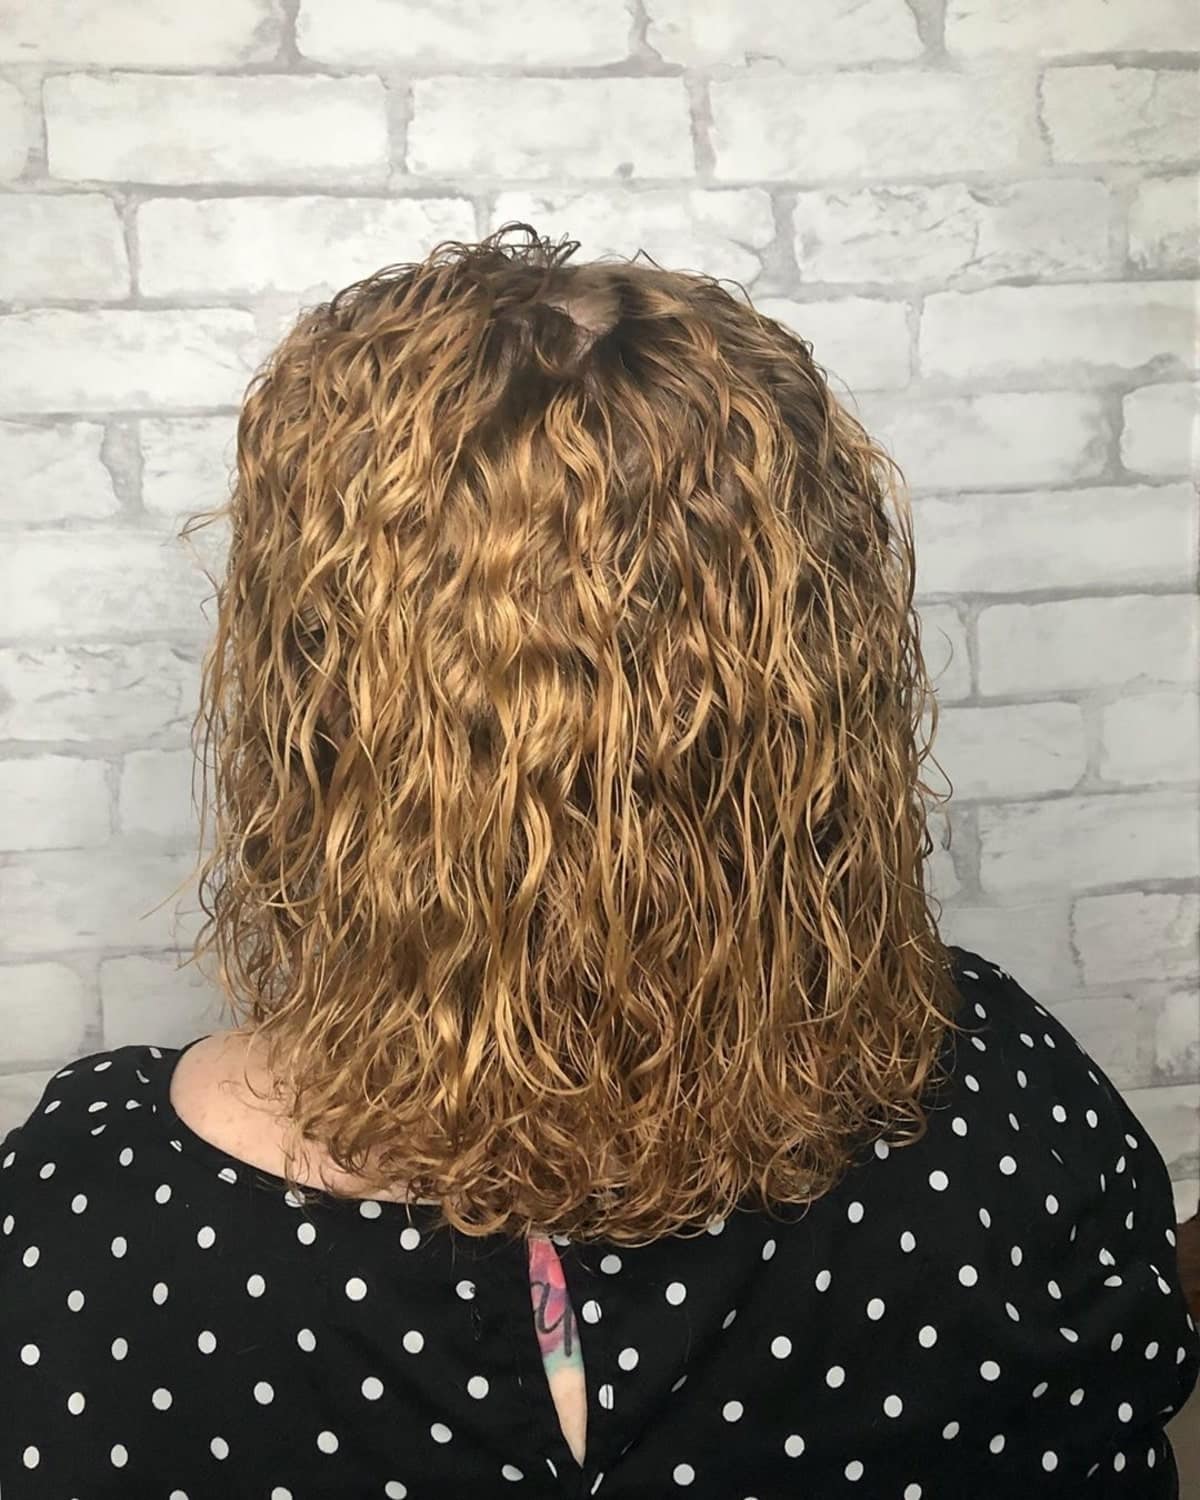 15 Modern Spiral Perm Hairstyles Women Are Getting Right Now